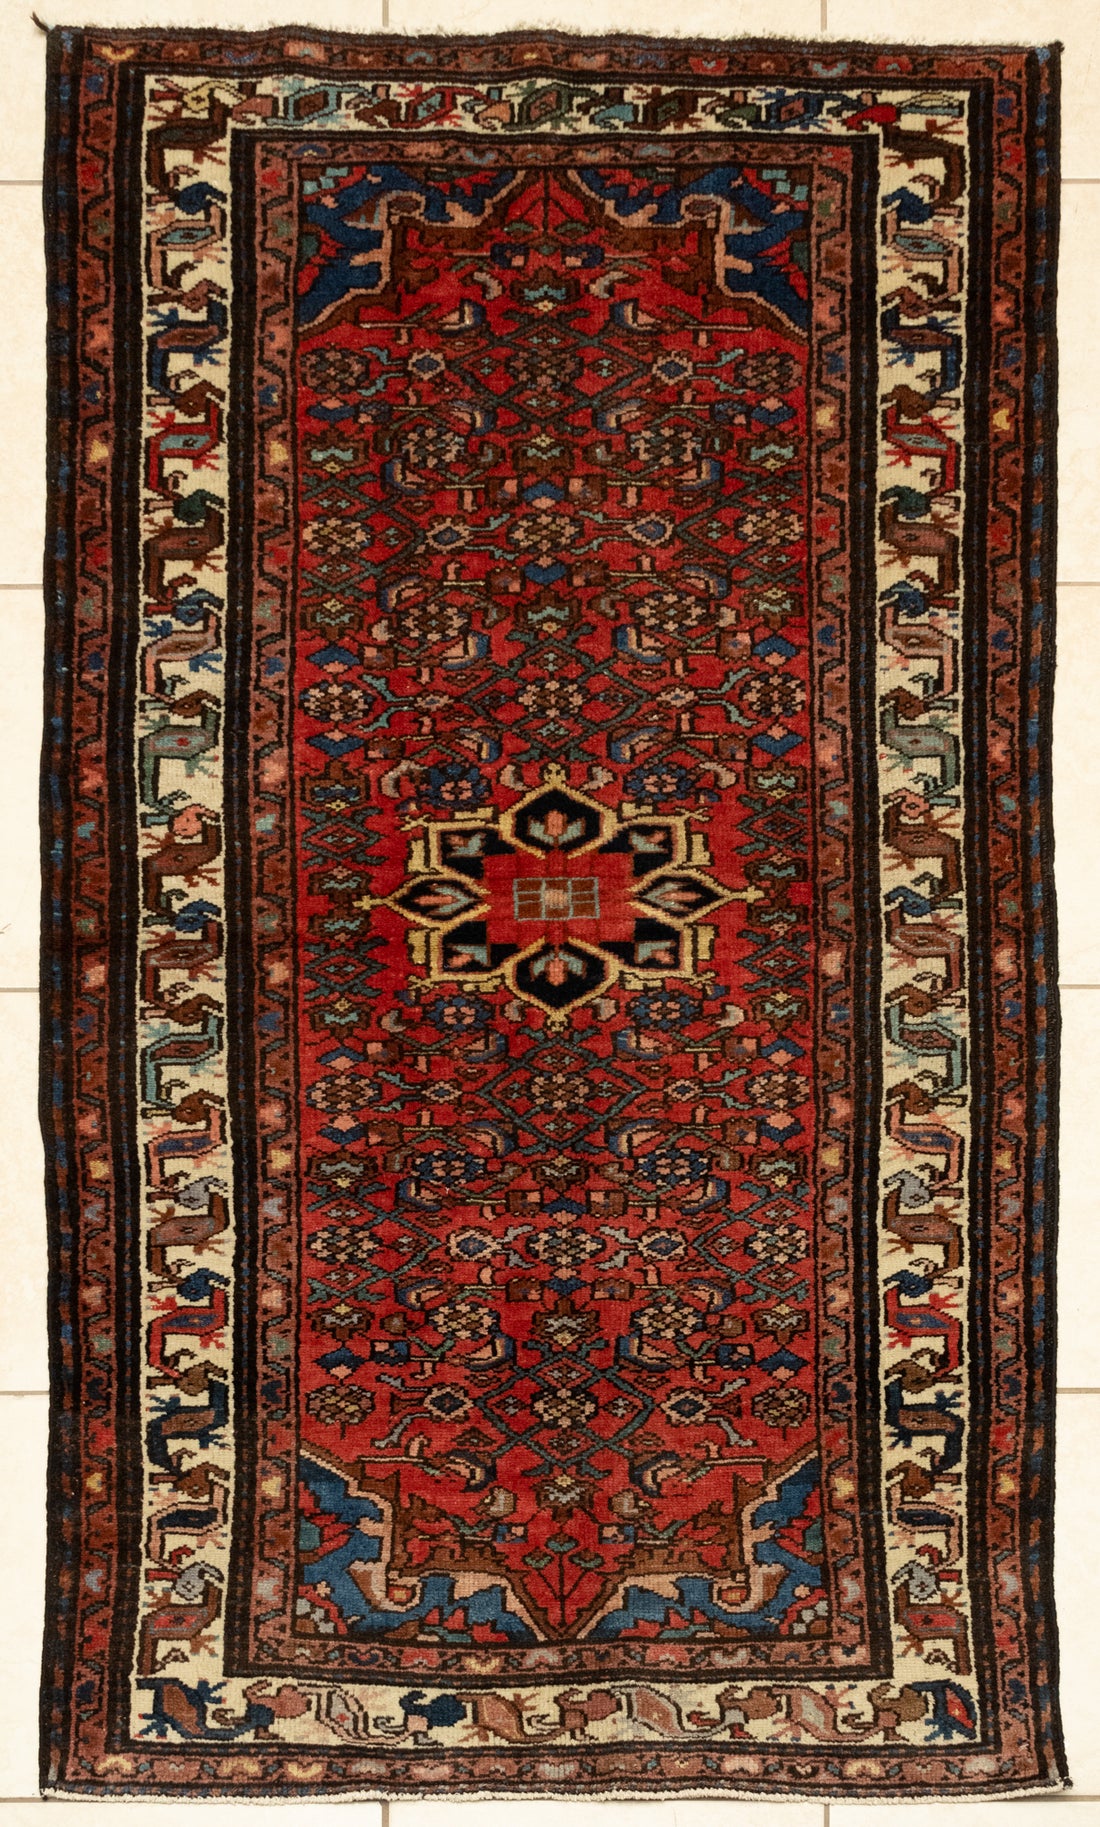 Wool Hand-Knotted Malayer Rug 6'6" x 3'5"